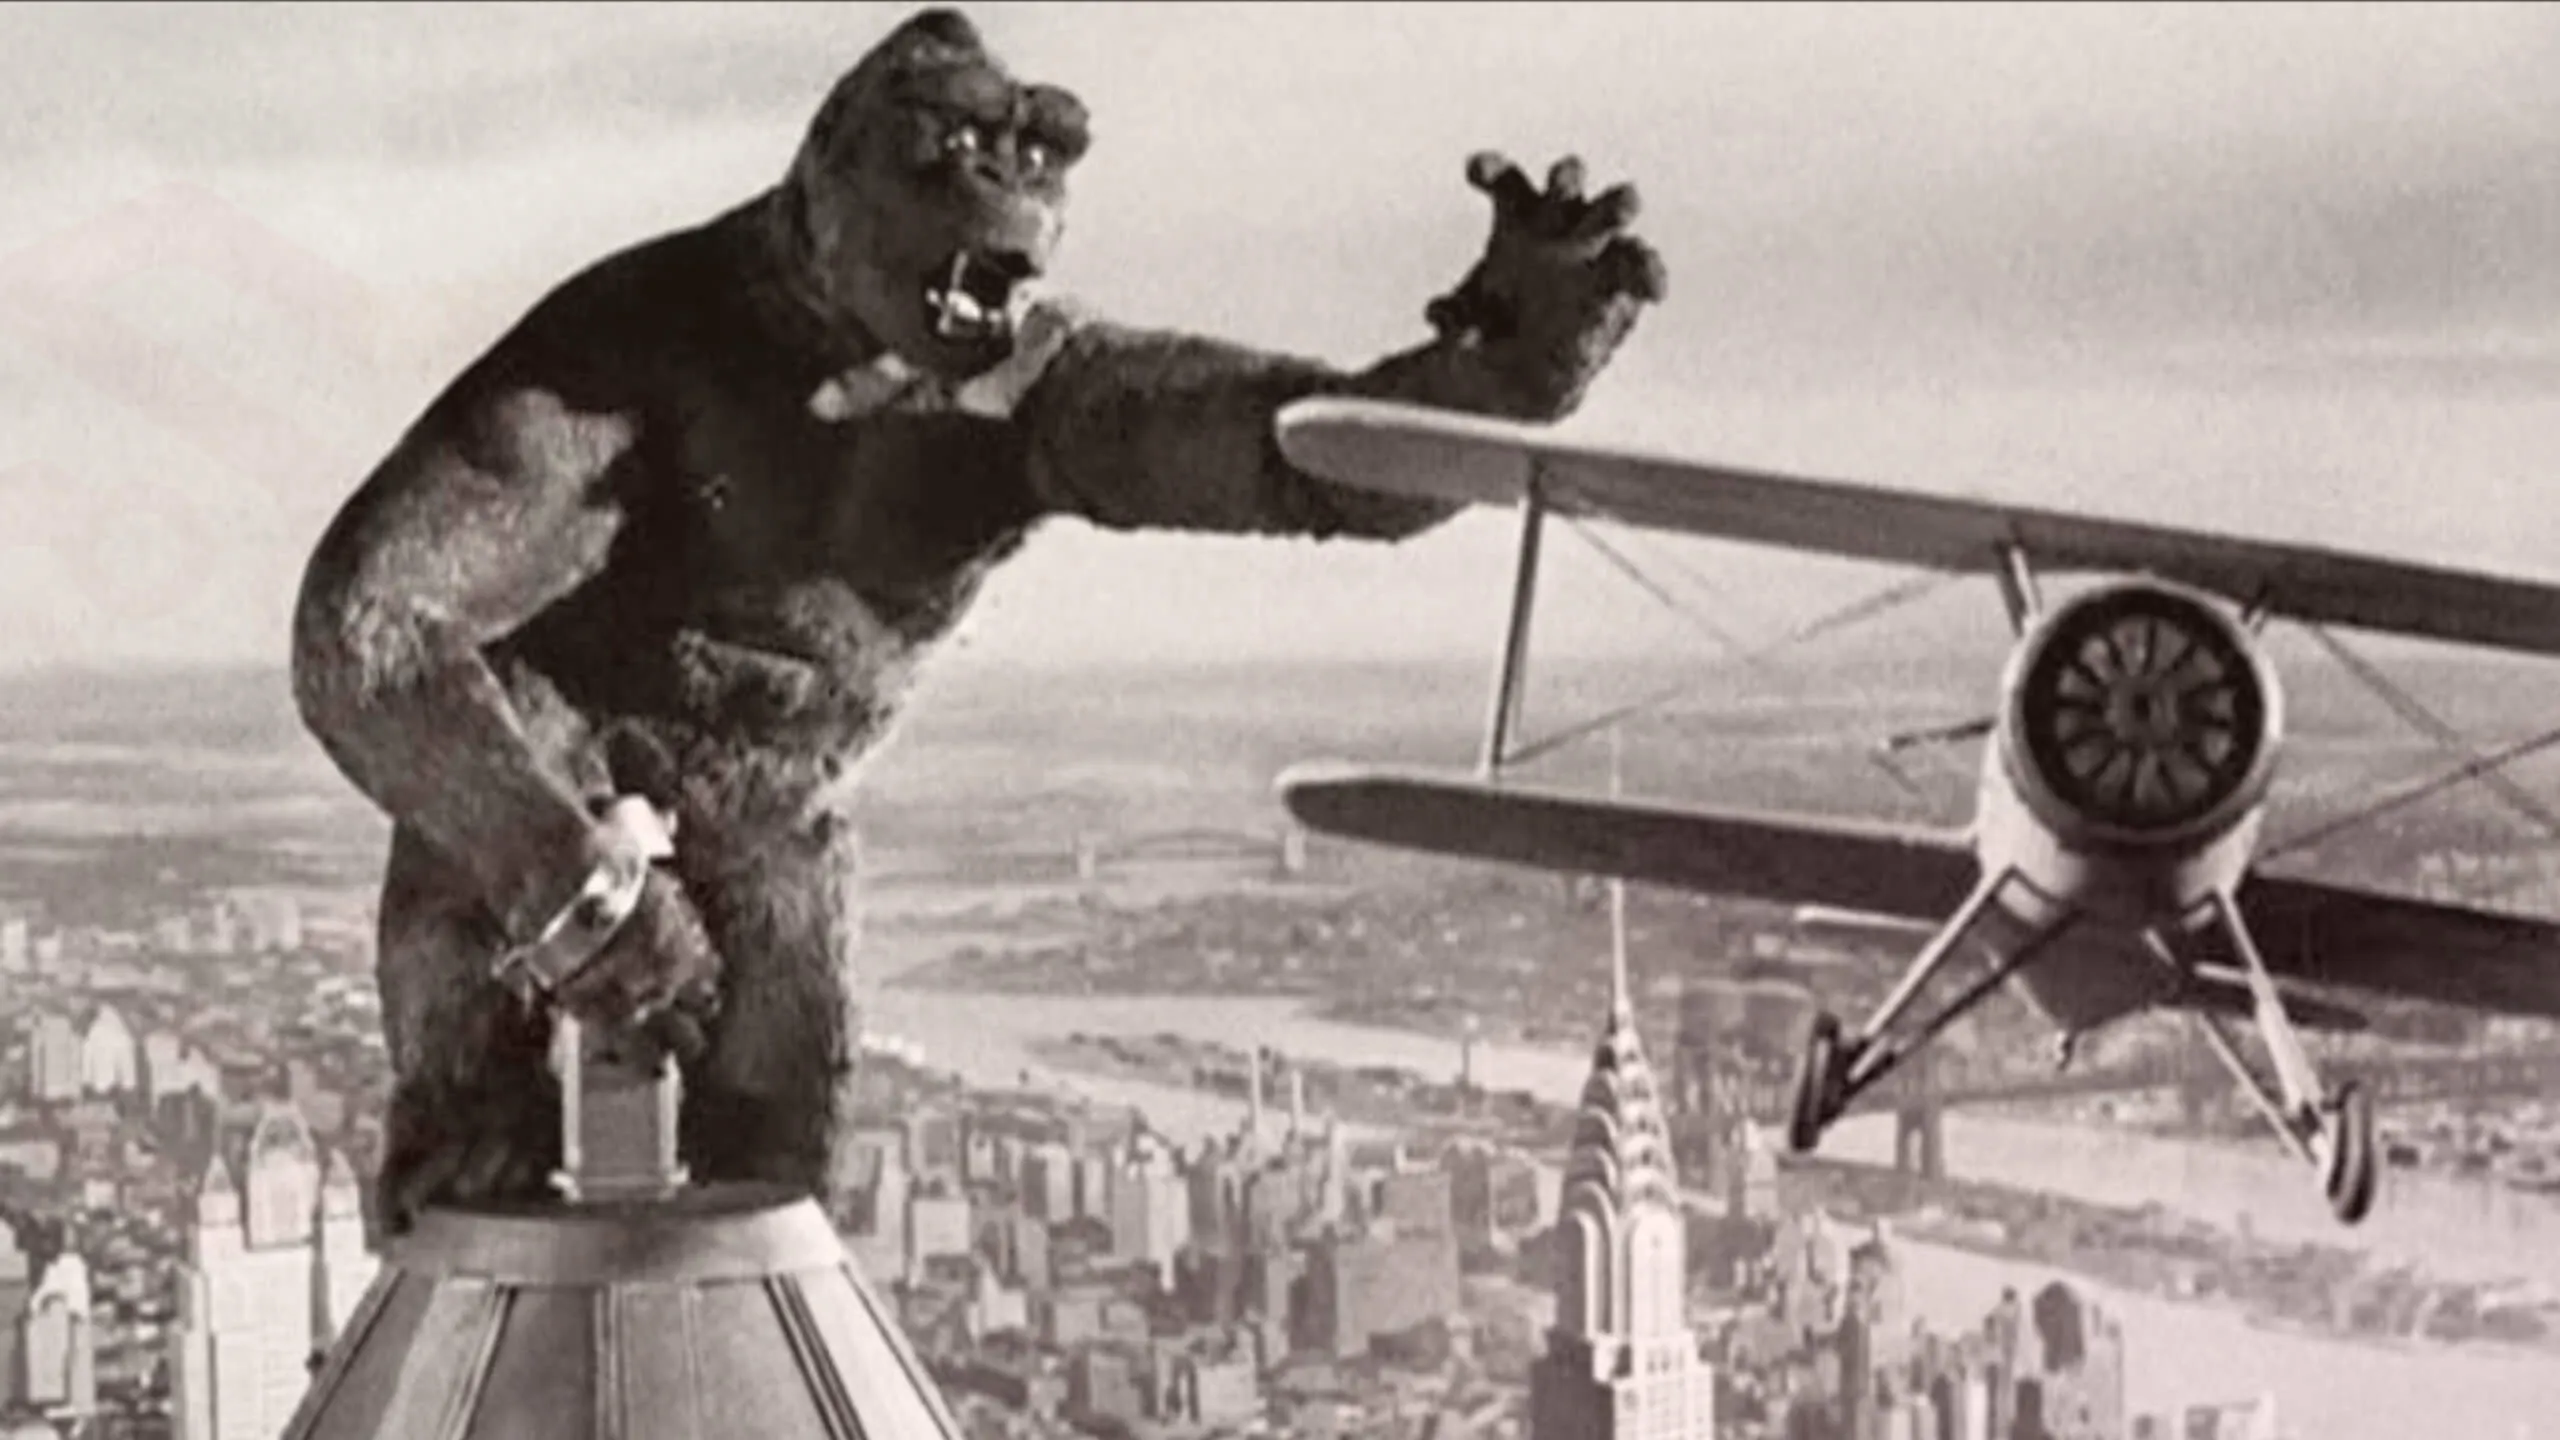 King Kong try hit a plane